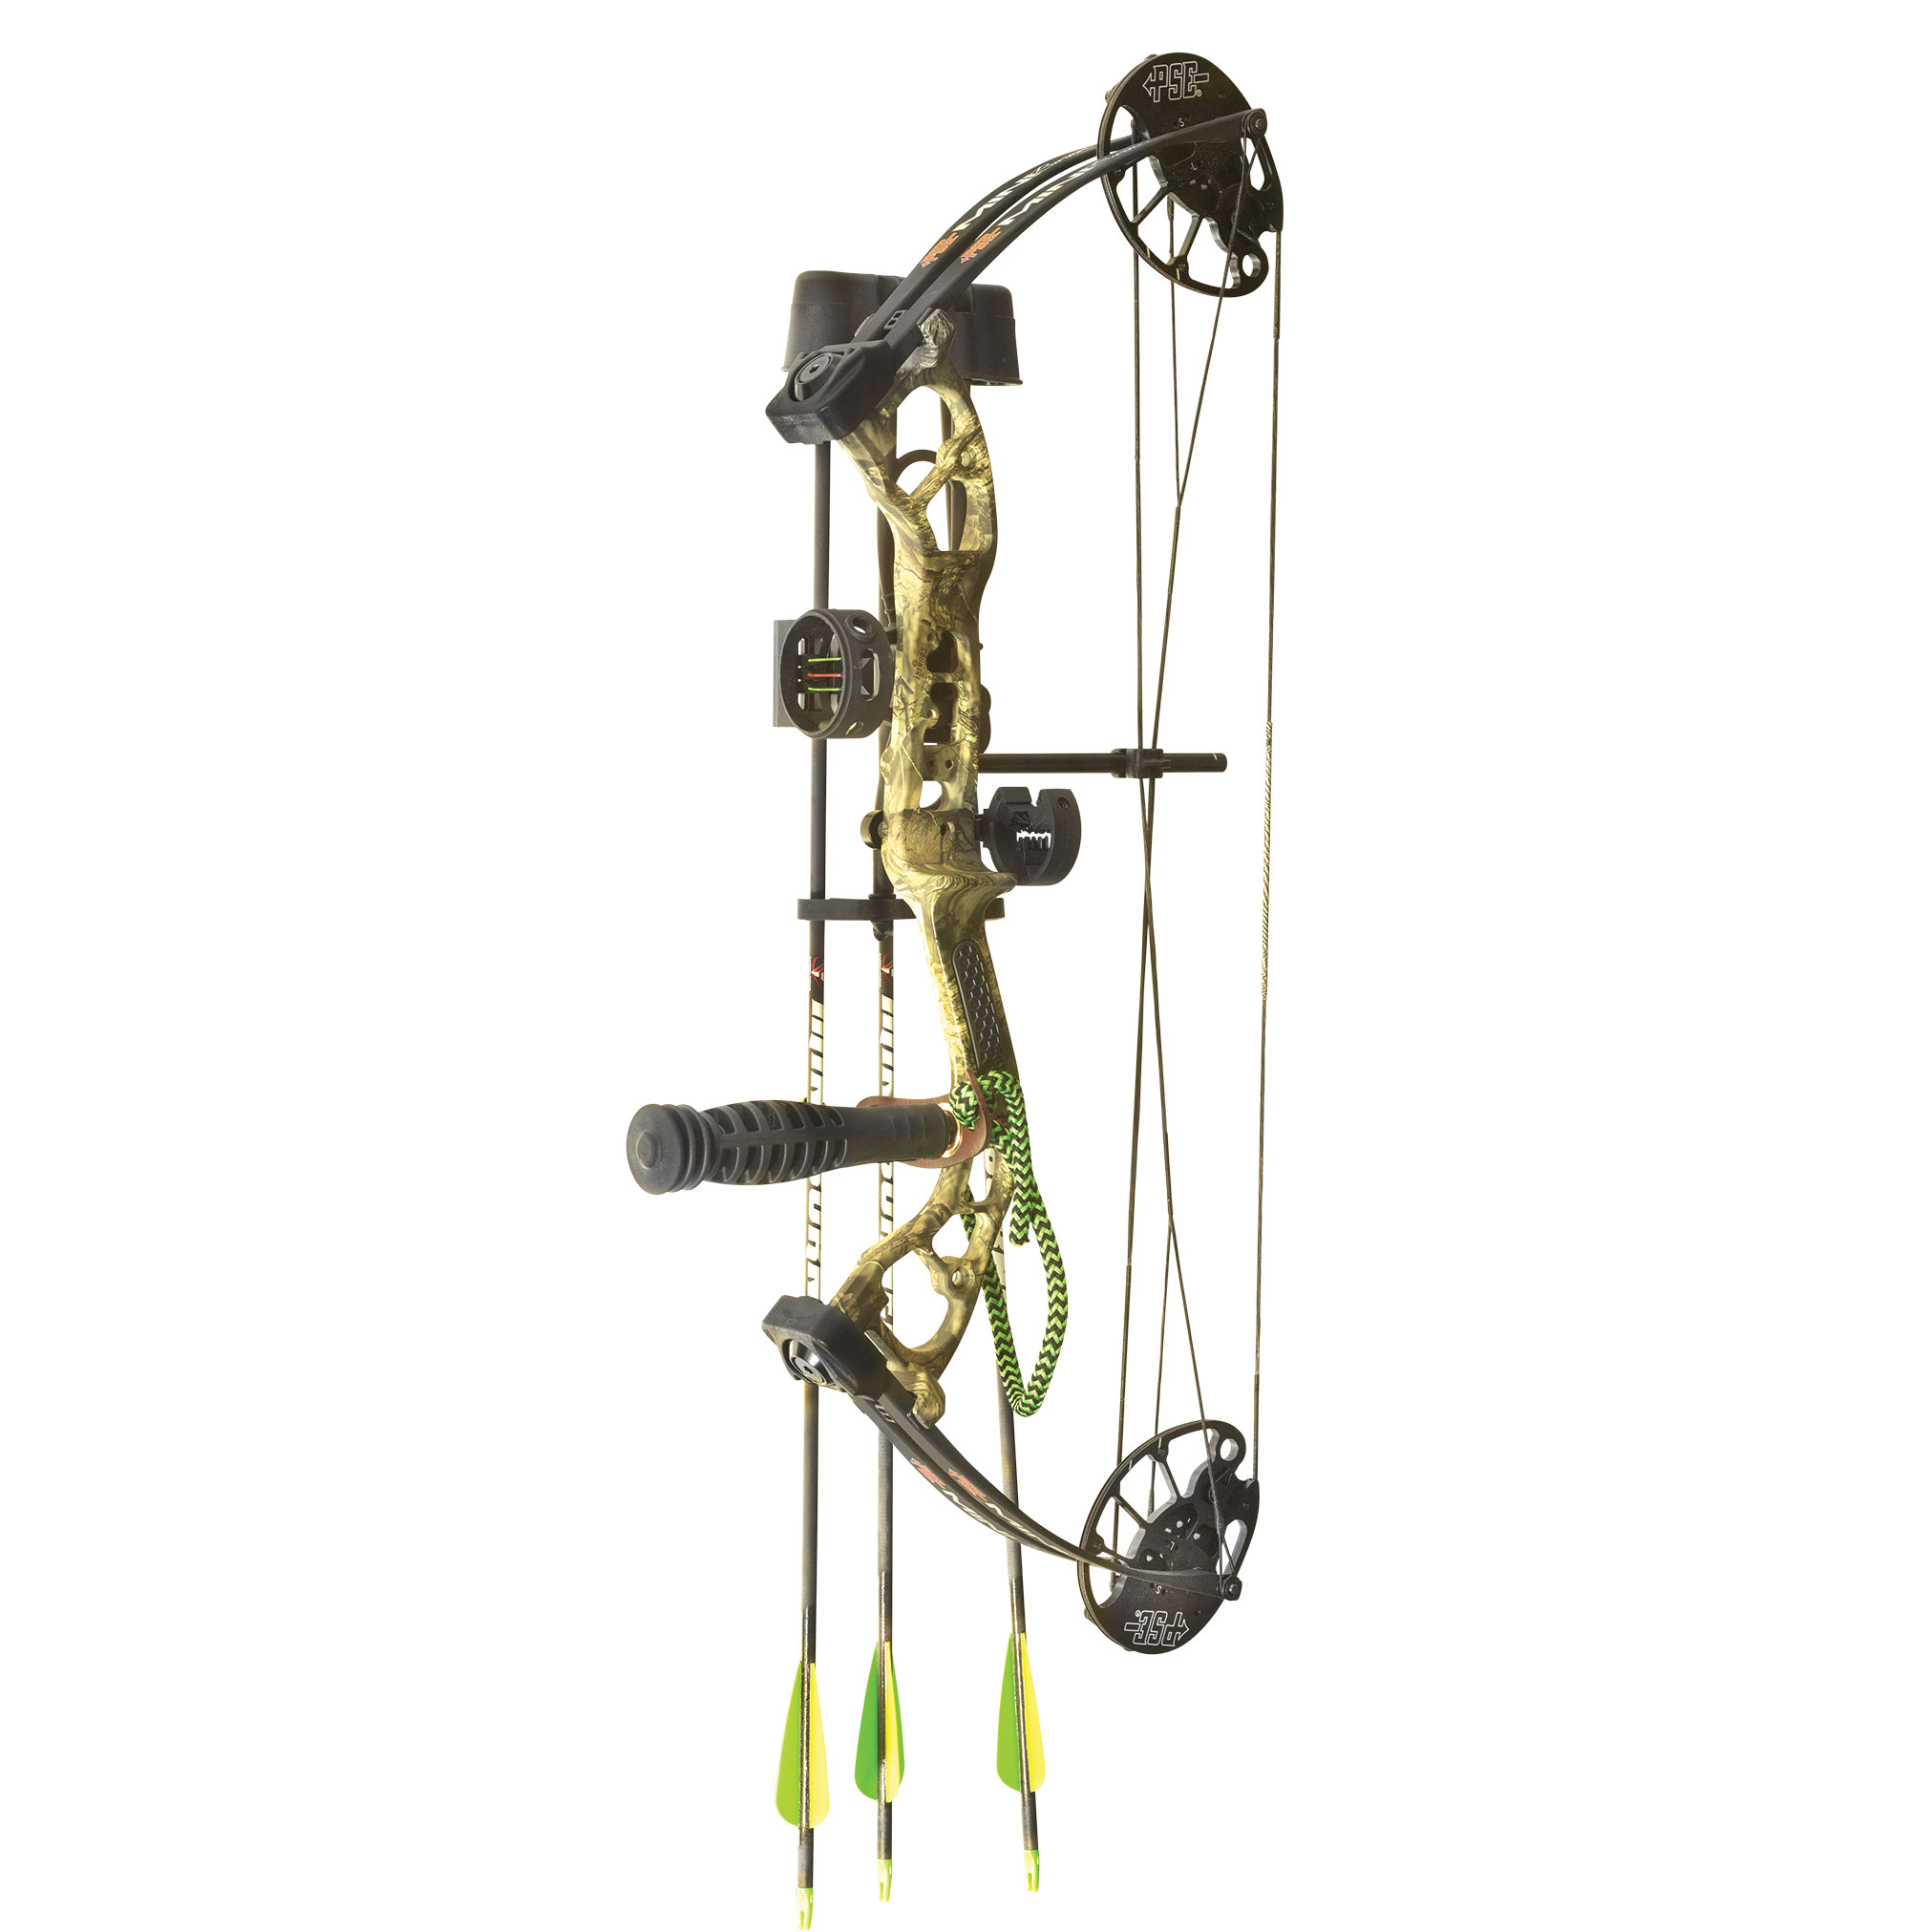 Best PSE Bows Hunting Gear for All Levels Outdoor Life